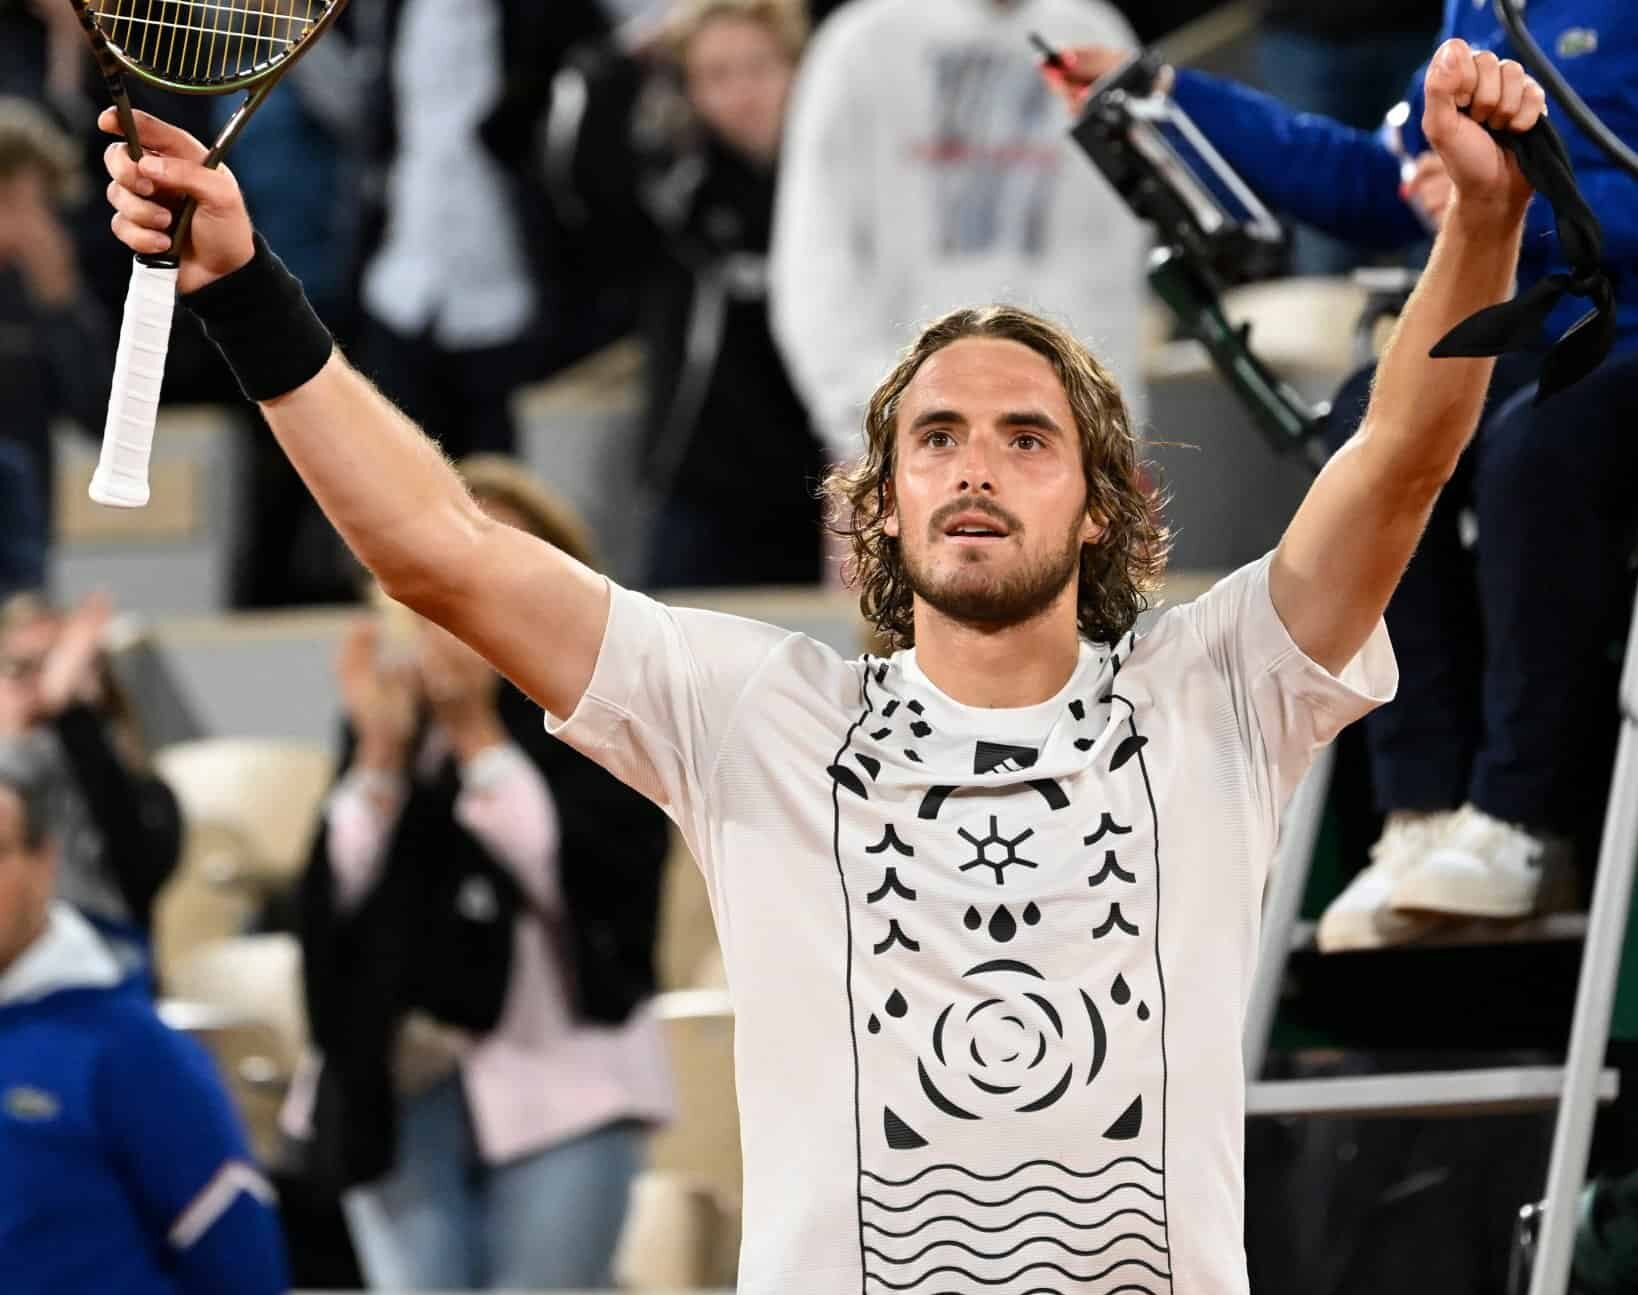 Stefanos Tsitsipas overcomes two sets to love deficit to defeat Musetti and reach round 2 35